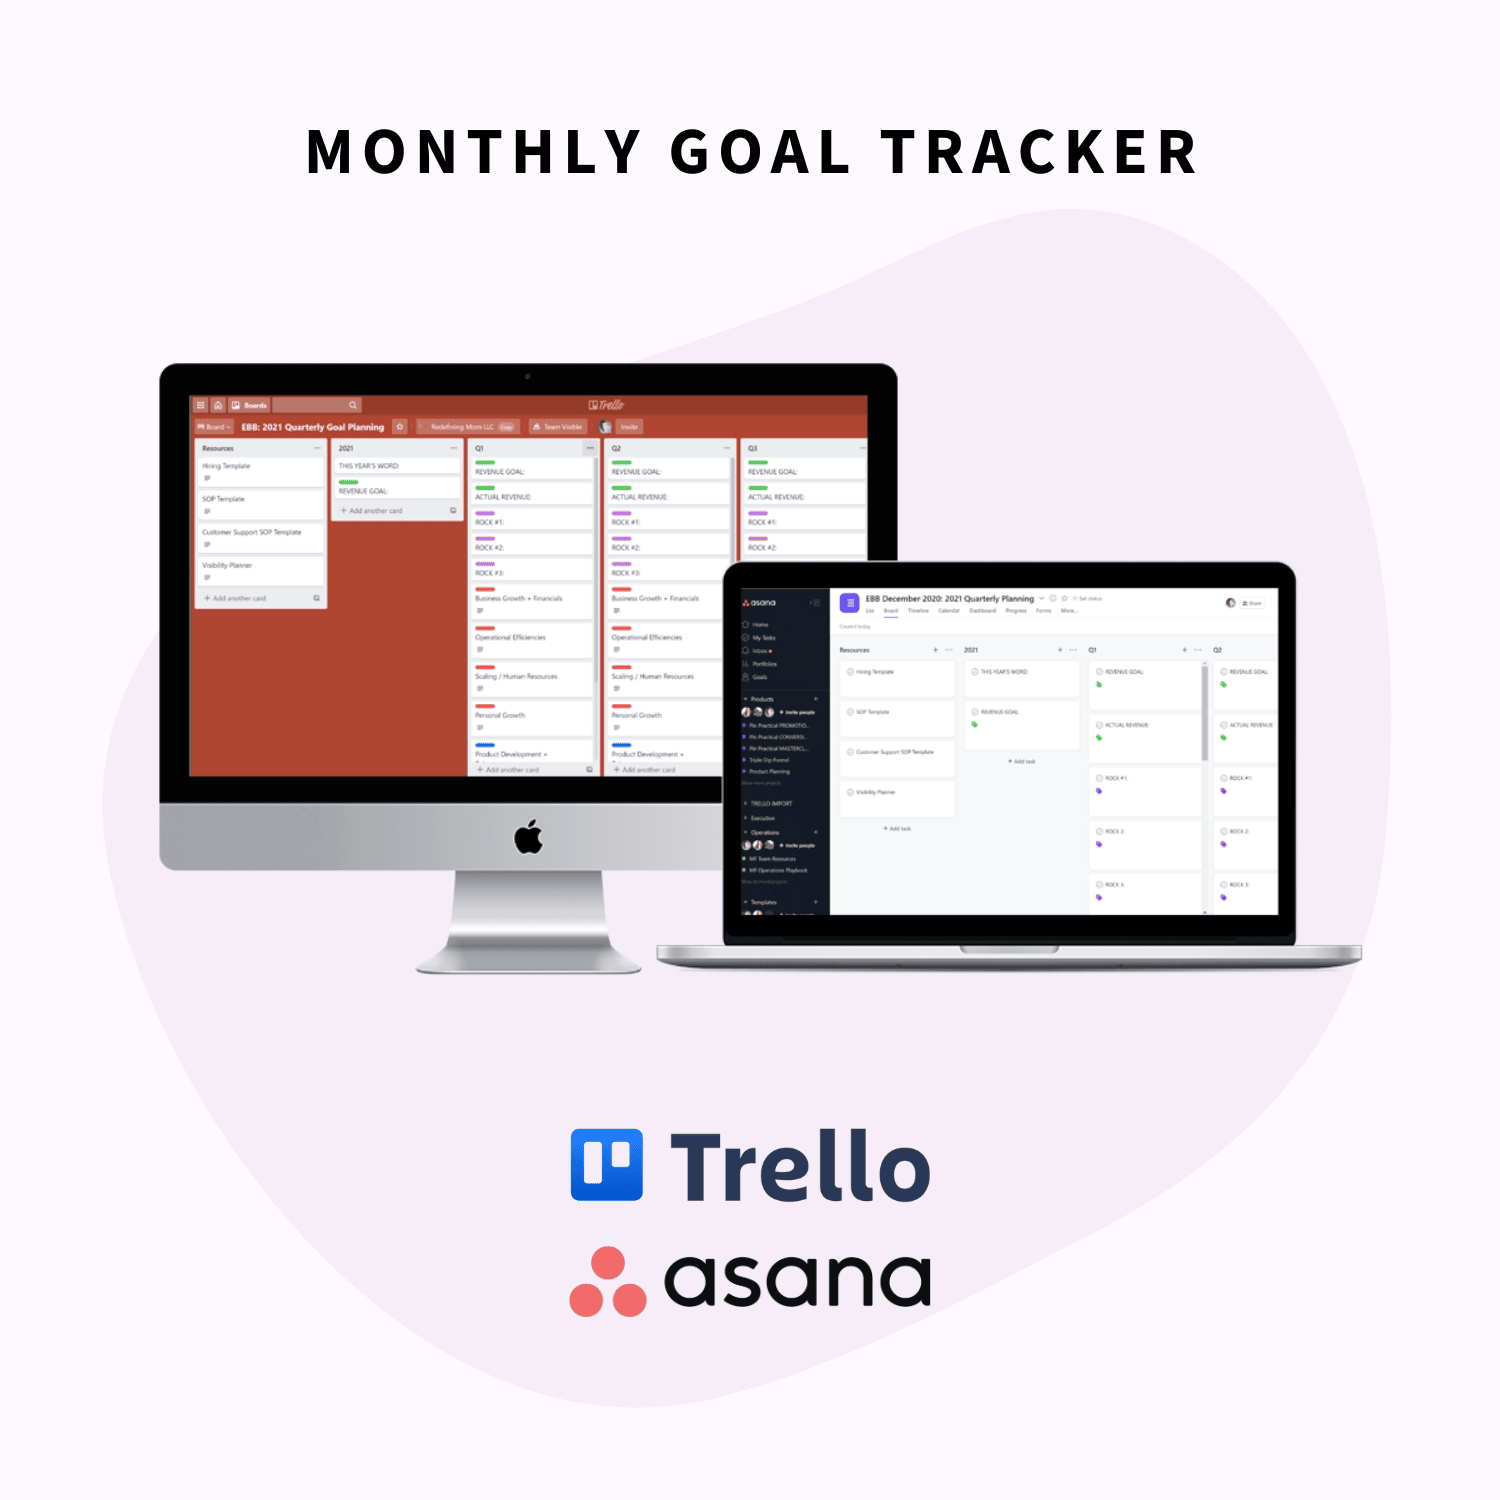 monthly goal tracker for trello and asana in the CEO Starter Kit Toolbox